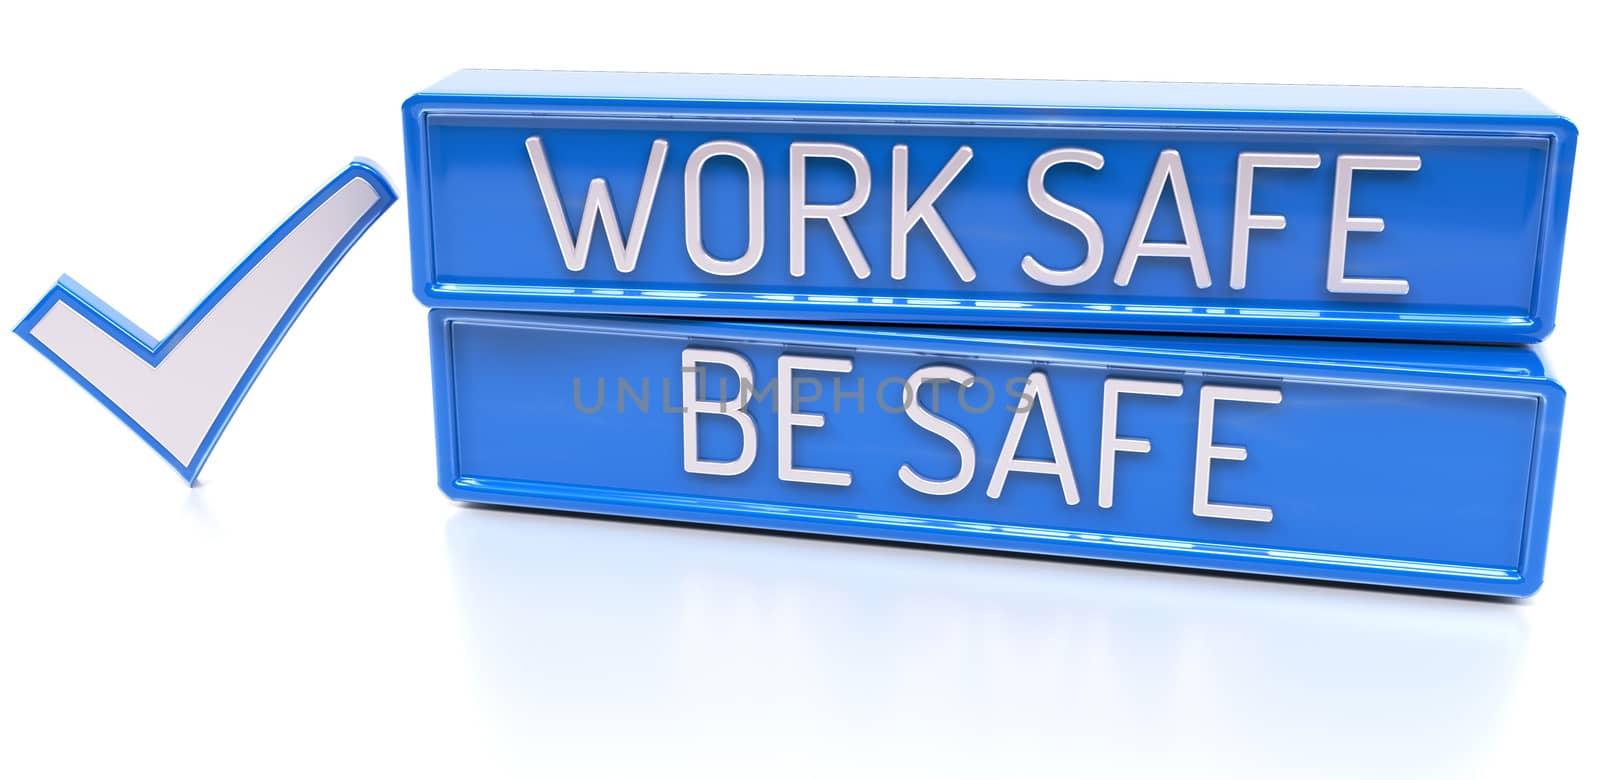 Work Safe Be Safe - 3d banner, isolated on white background by akaprinay